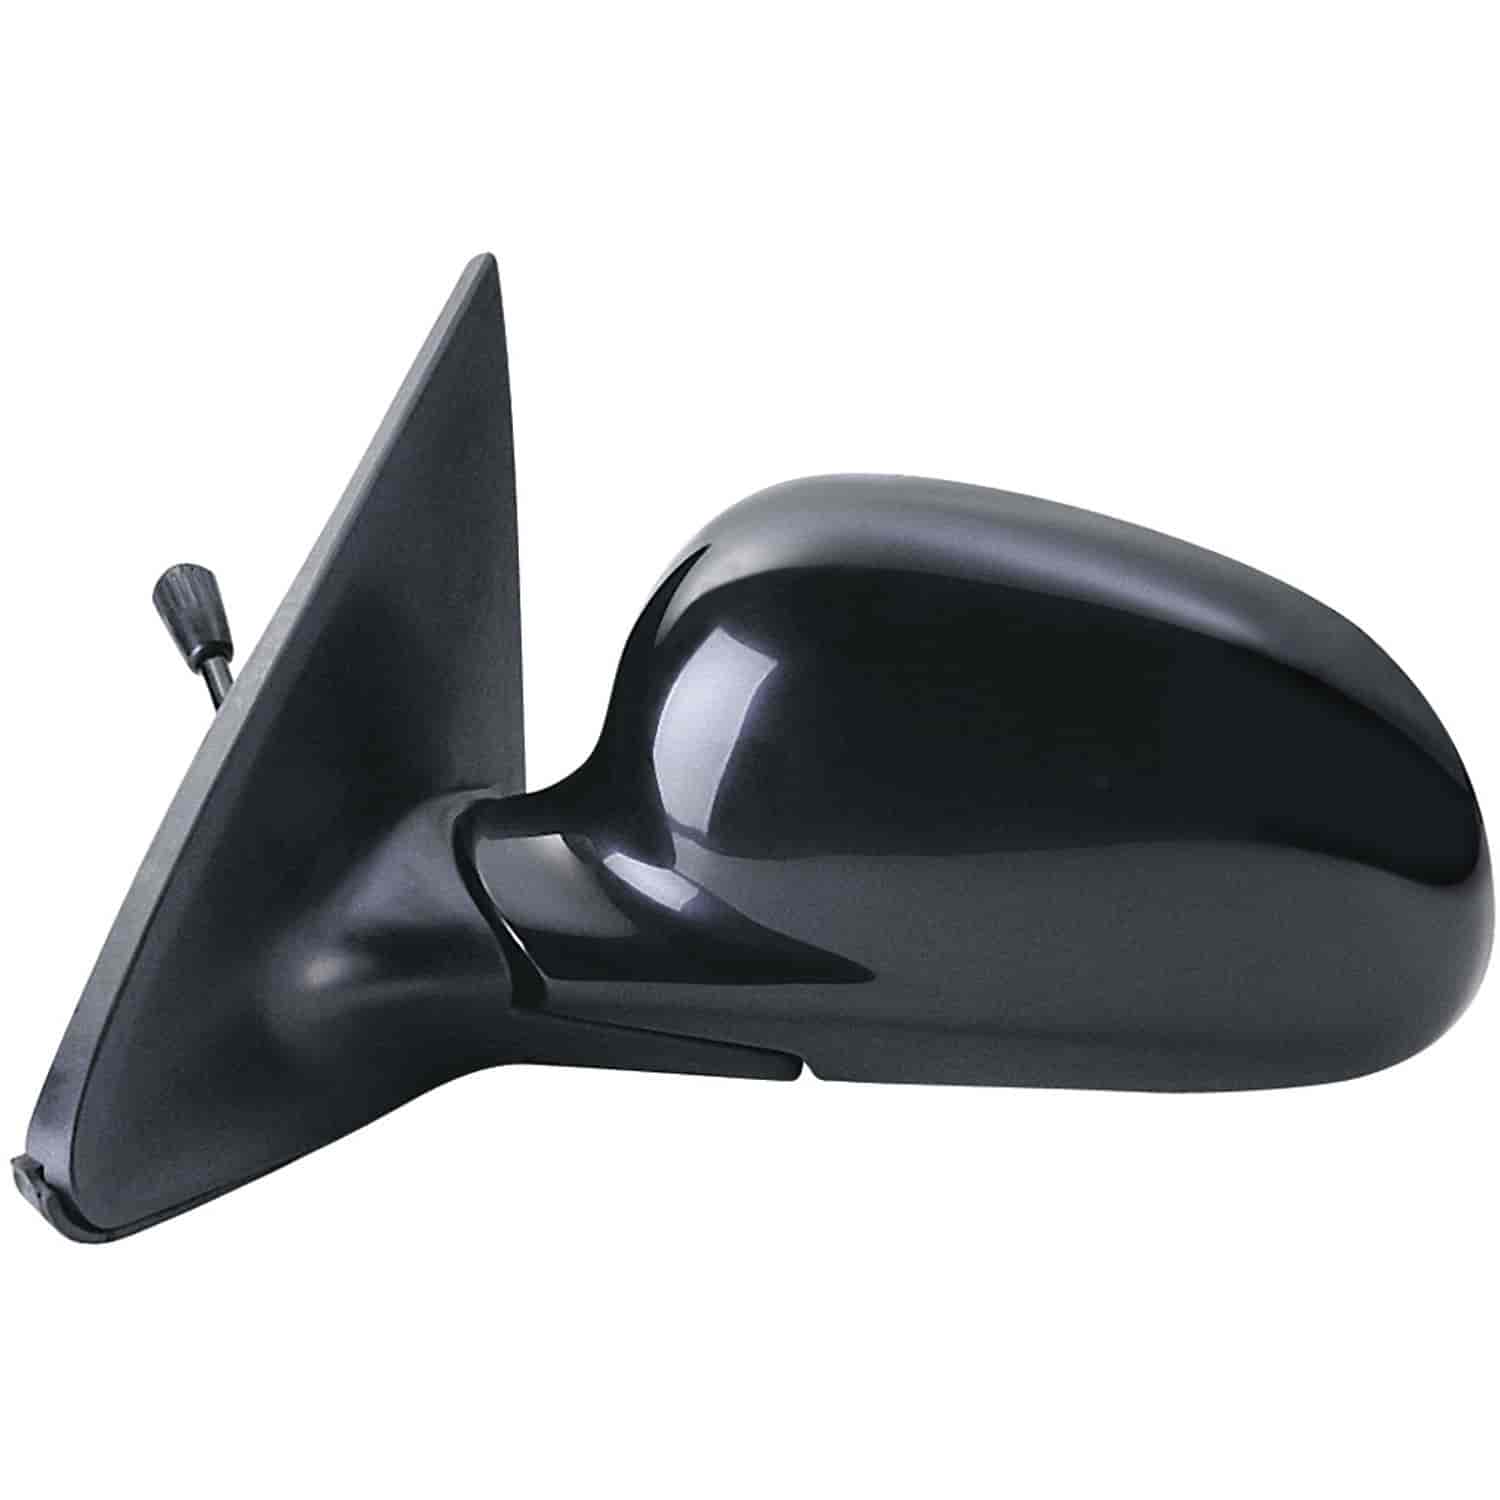 OEM Style Replacement mirror for 92-95 Honda Civic Hatchback/Coupe driver side mirror tested to fit